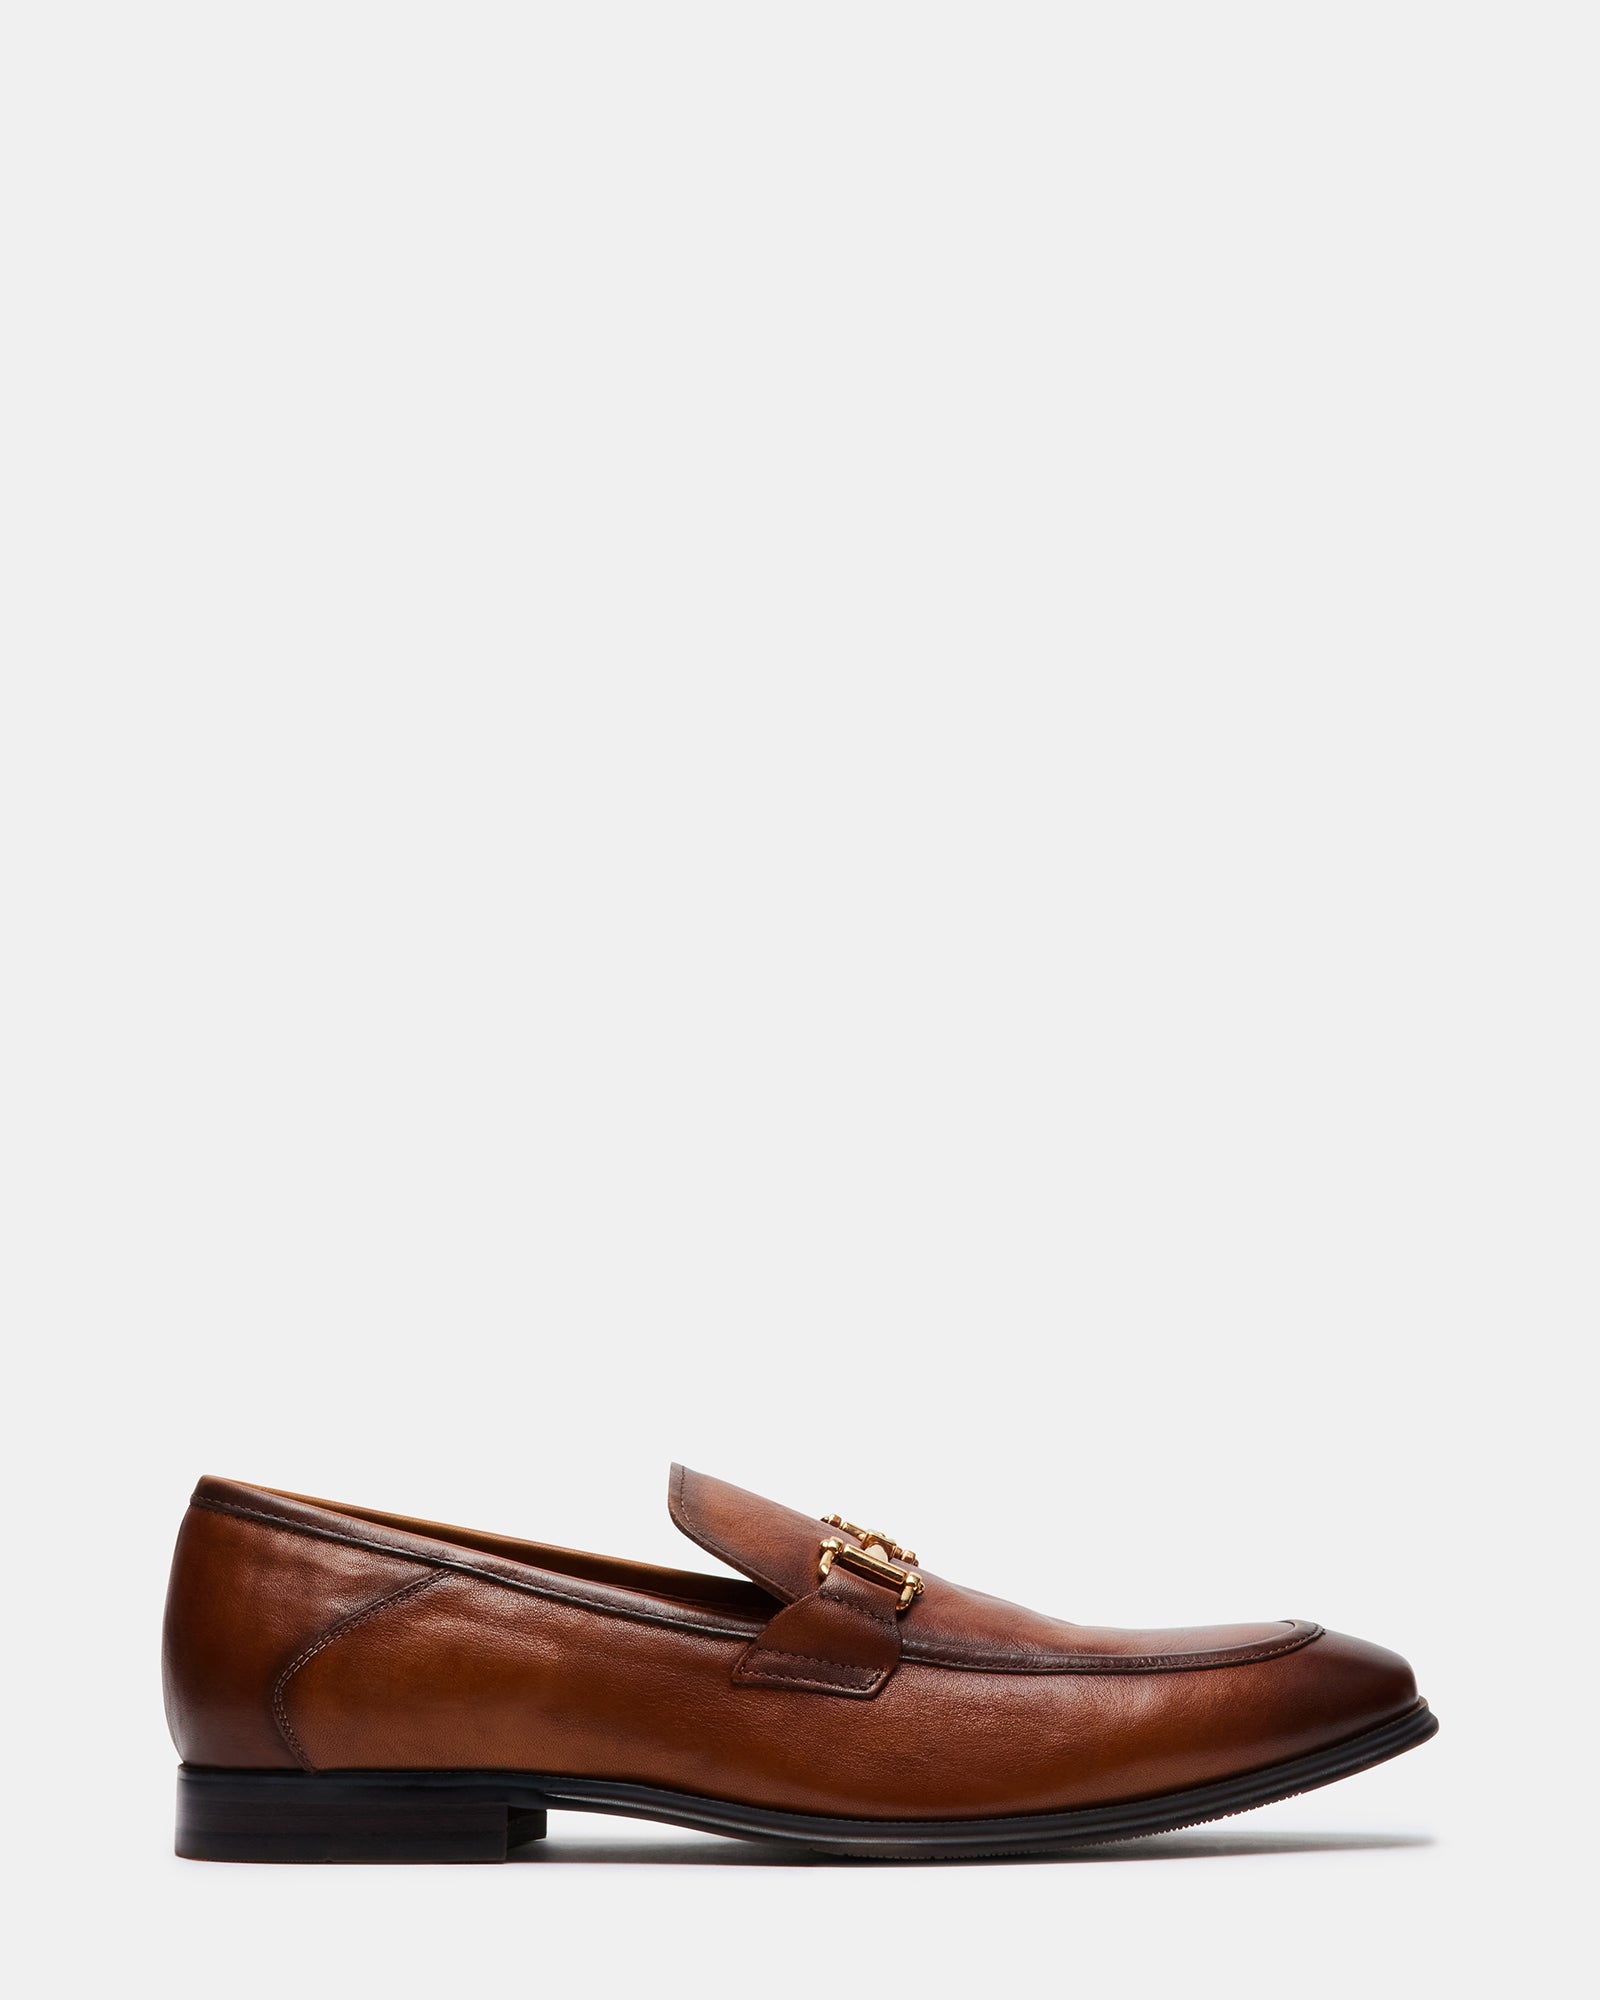 ARCHEE Cognac Leather Dress Loafer